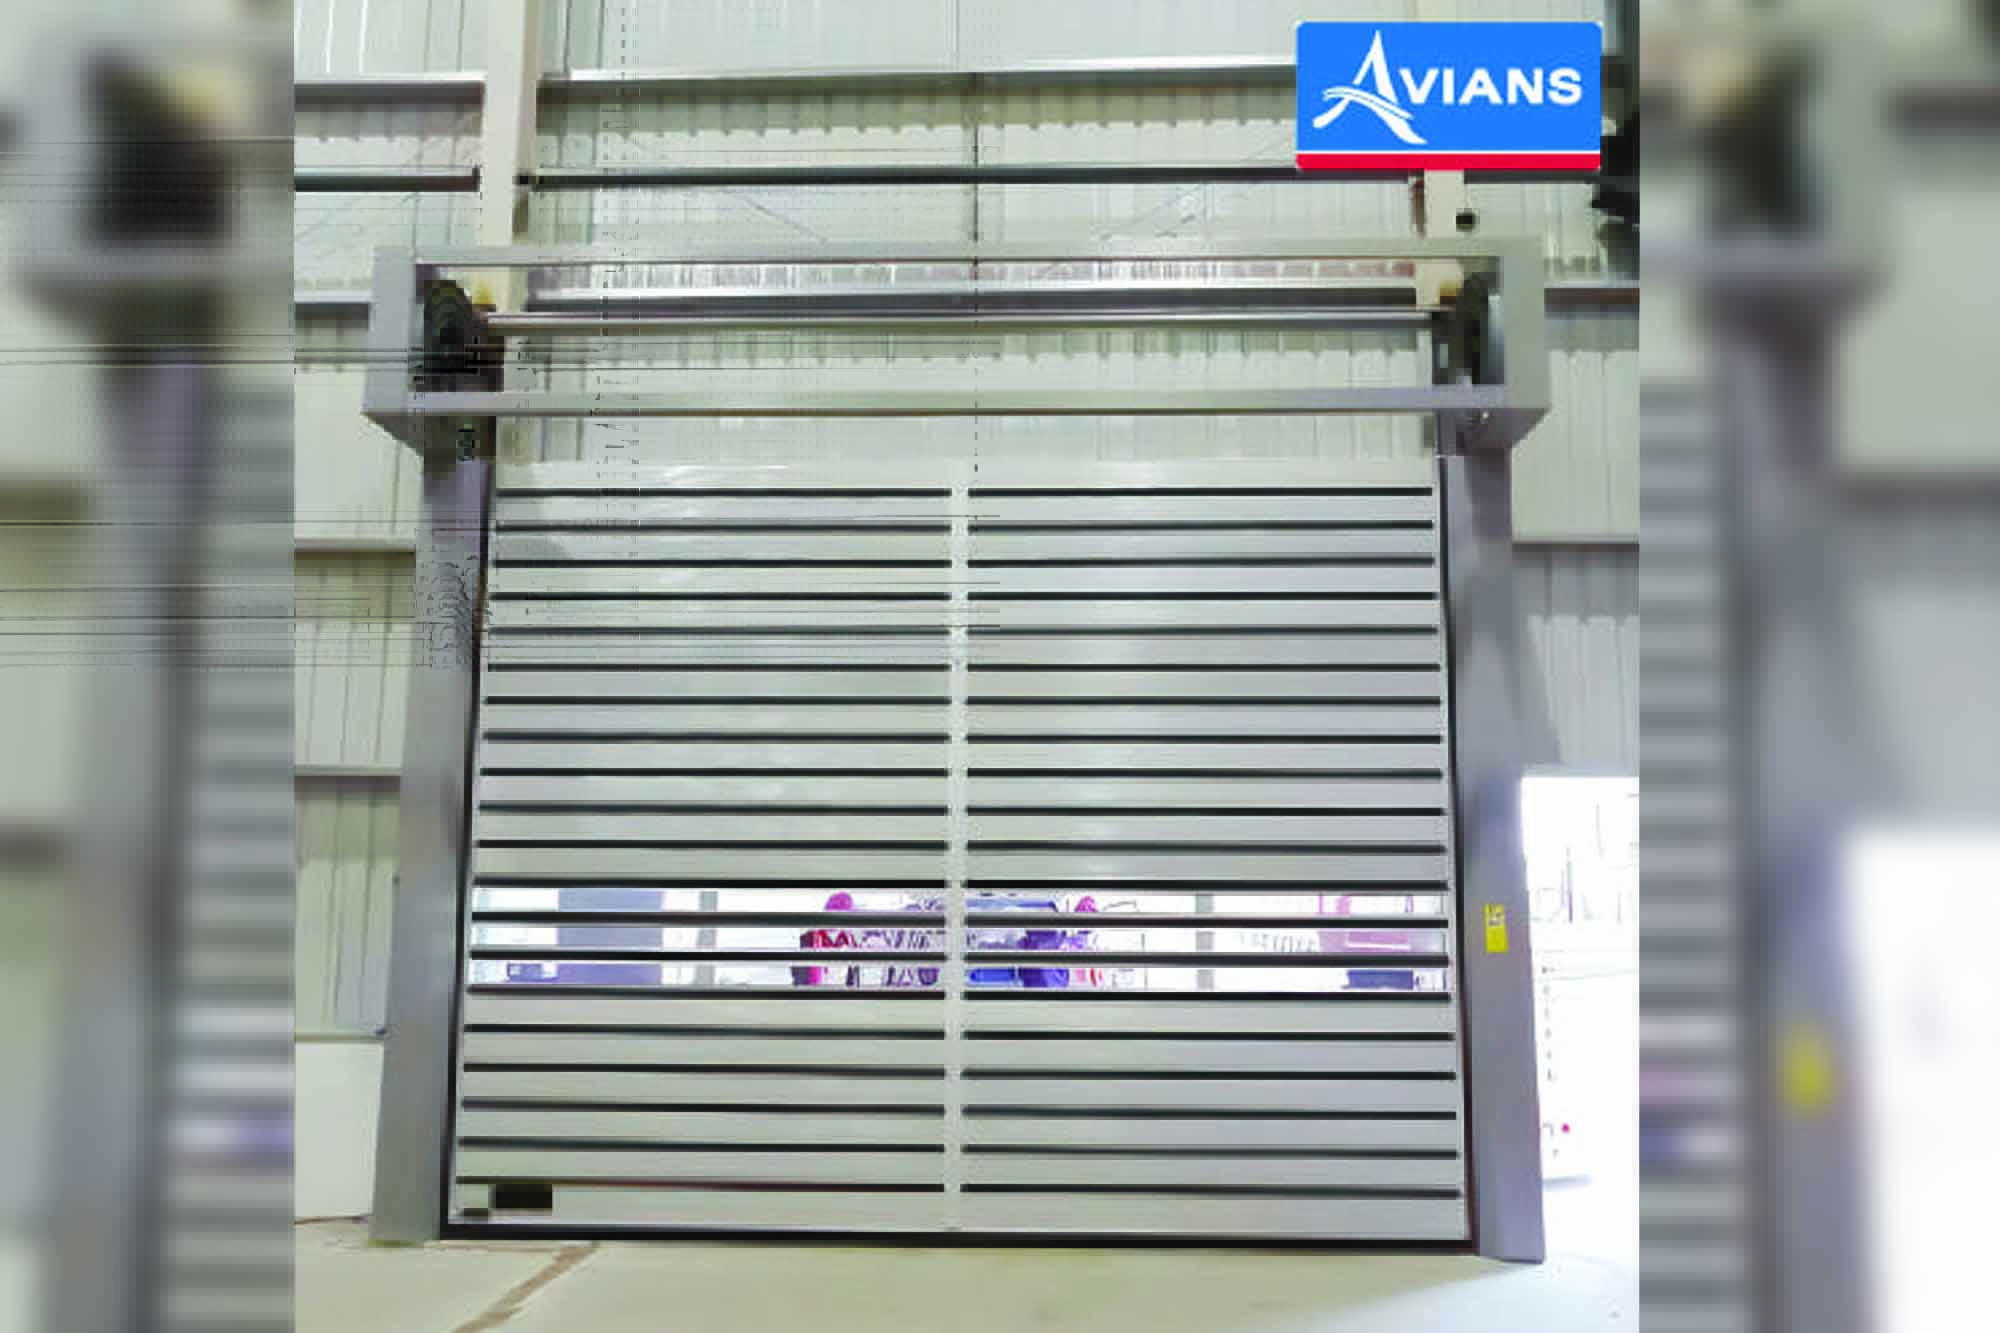 Avians unveils the Avians high-speed metallic spiral door, meeting the escalating demand for advanced access solutions in industrial and commercial spaces. This innovative door combines high-speed operation, metal rolling shutter robustness, and insulation for efficiency.